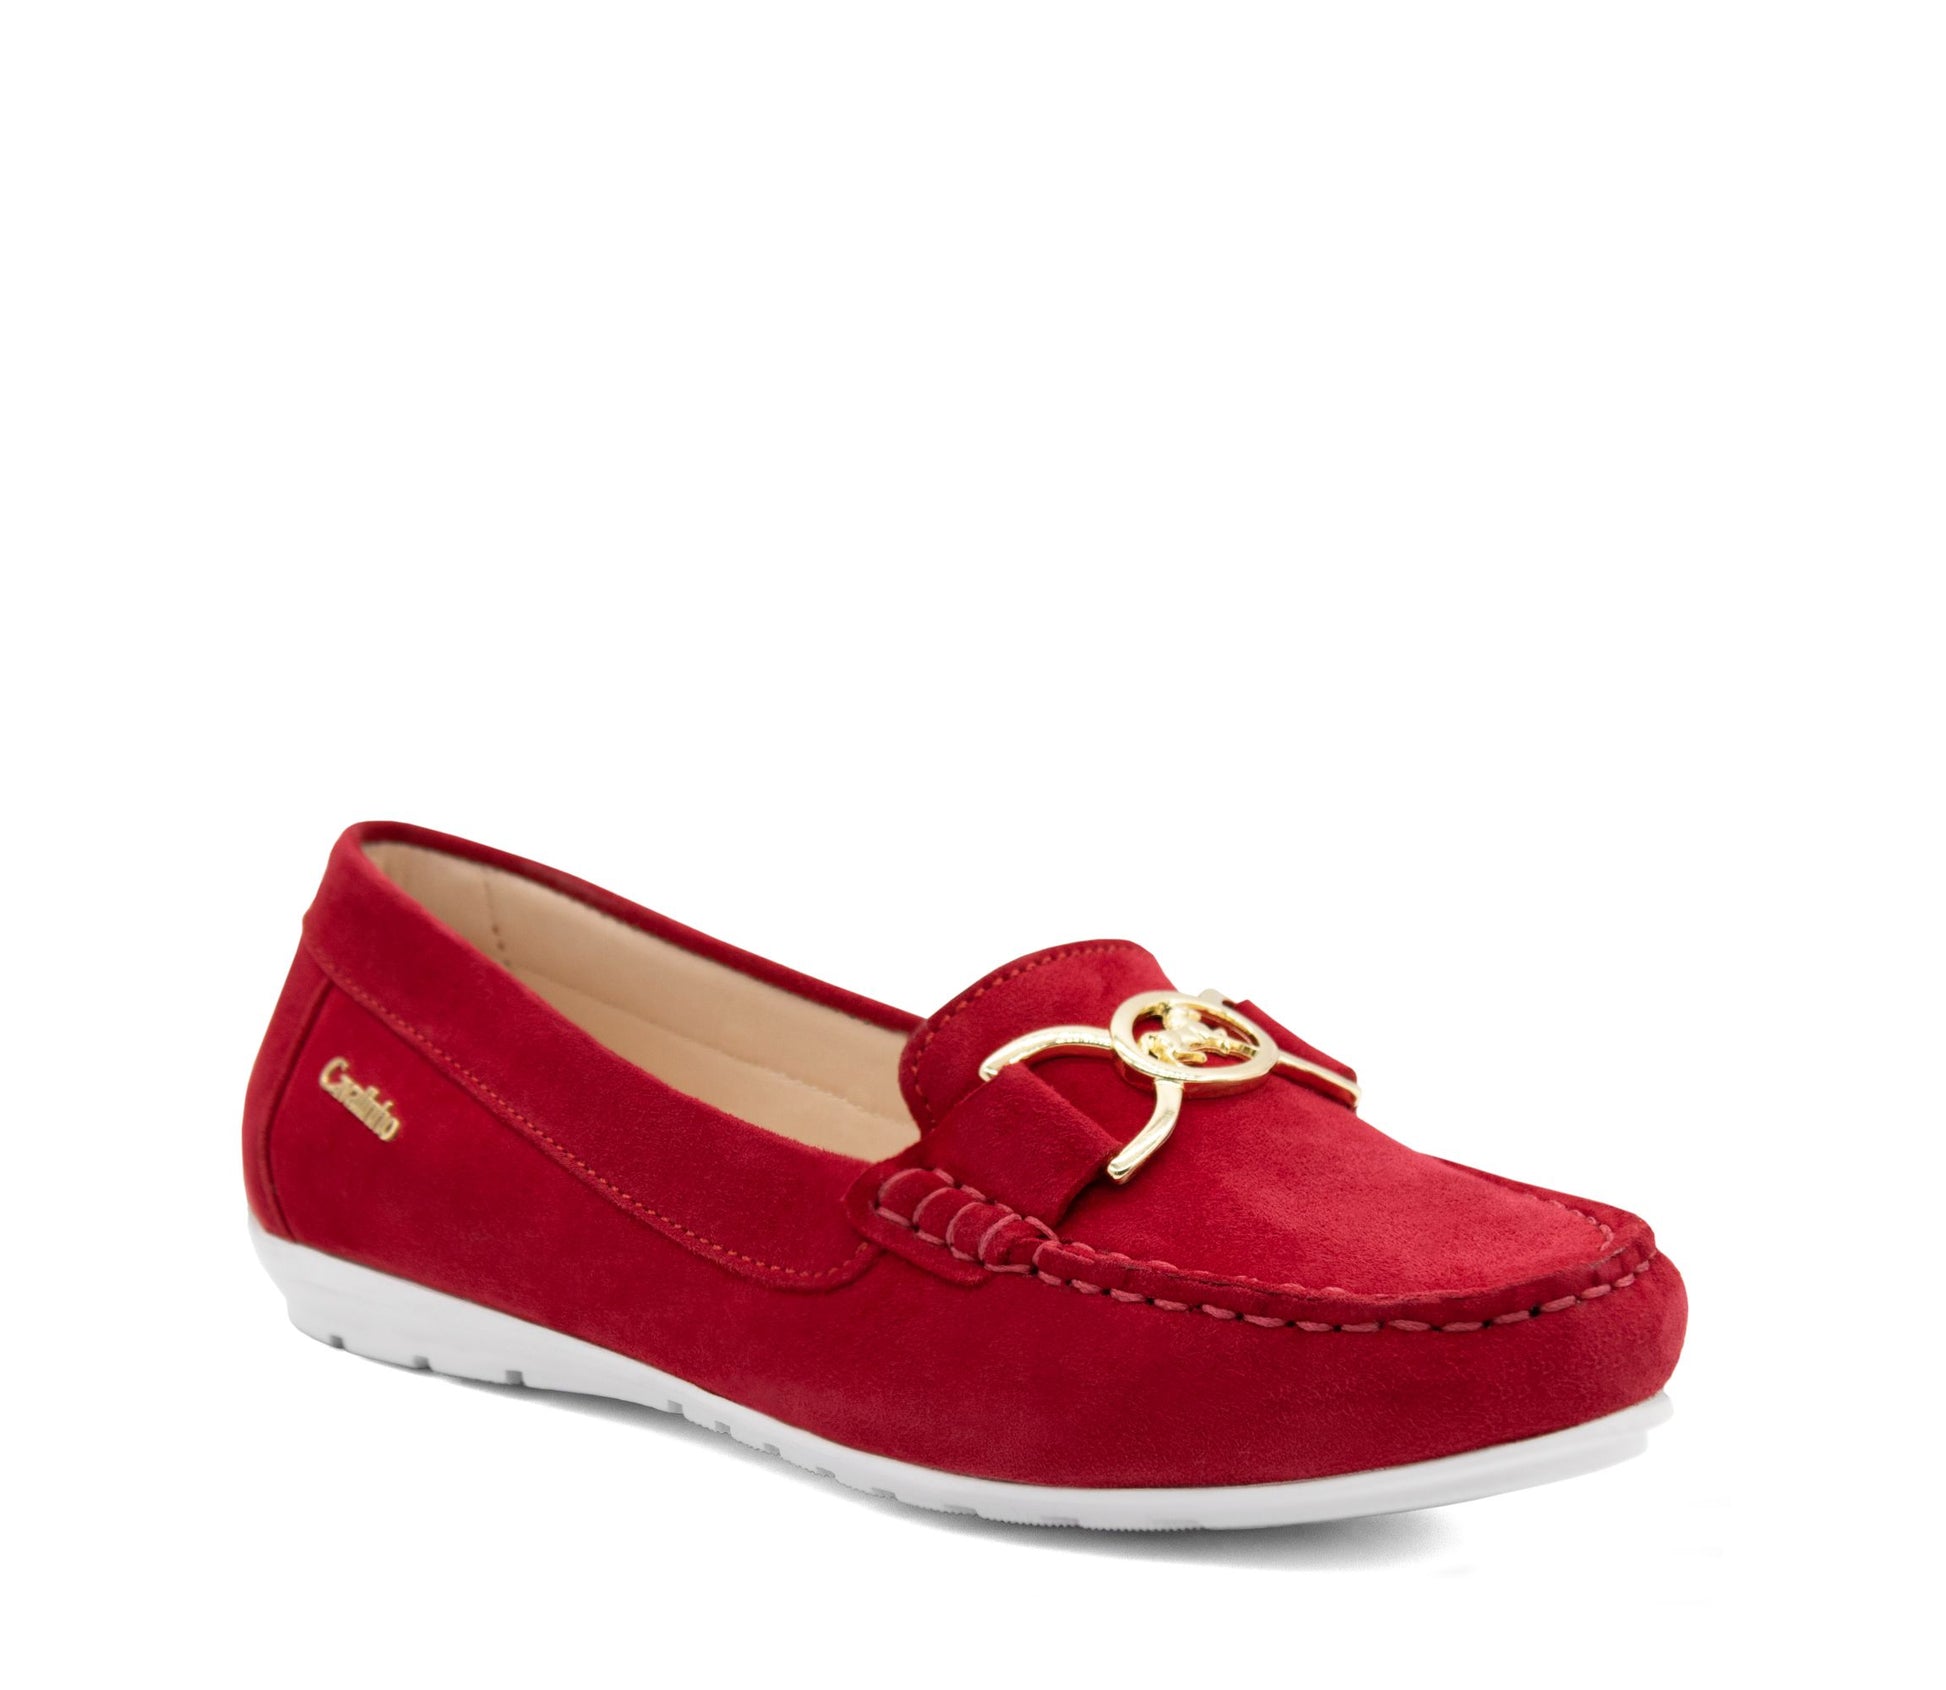 Cavalinho Belle Leather Loafers - Red - 48020001.04_2